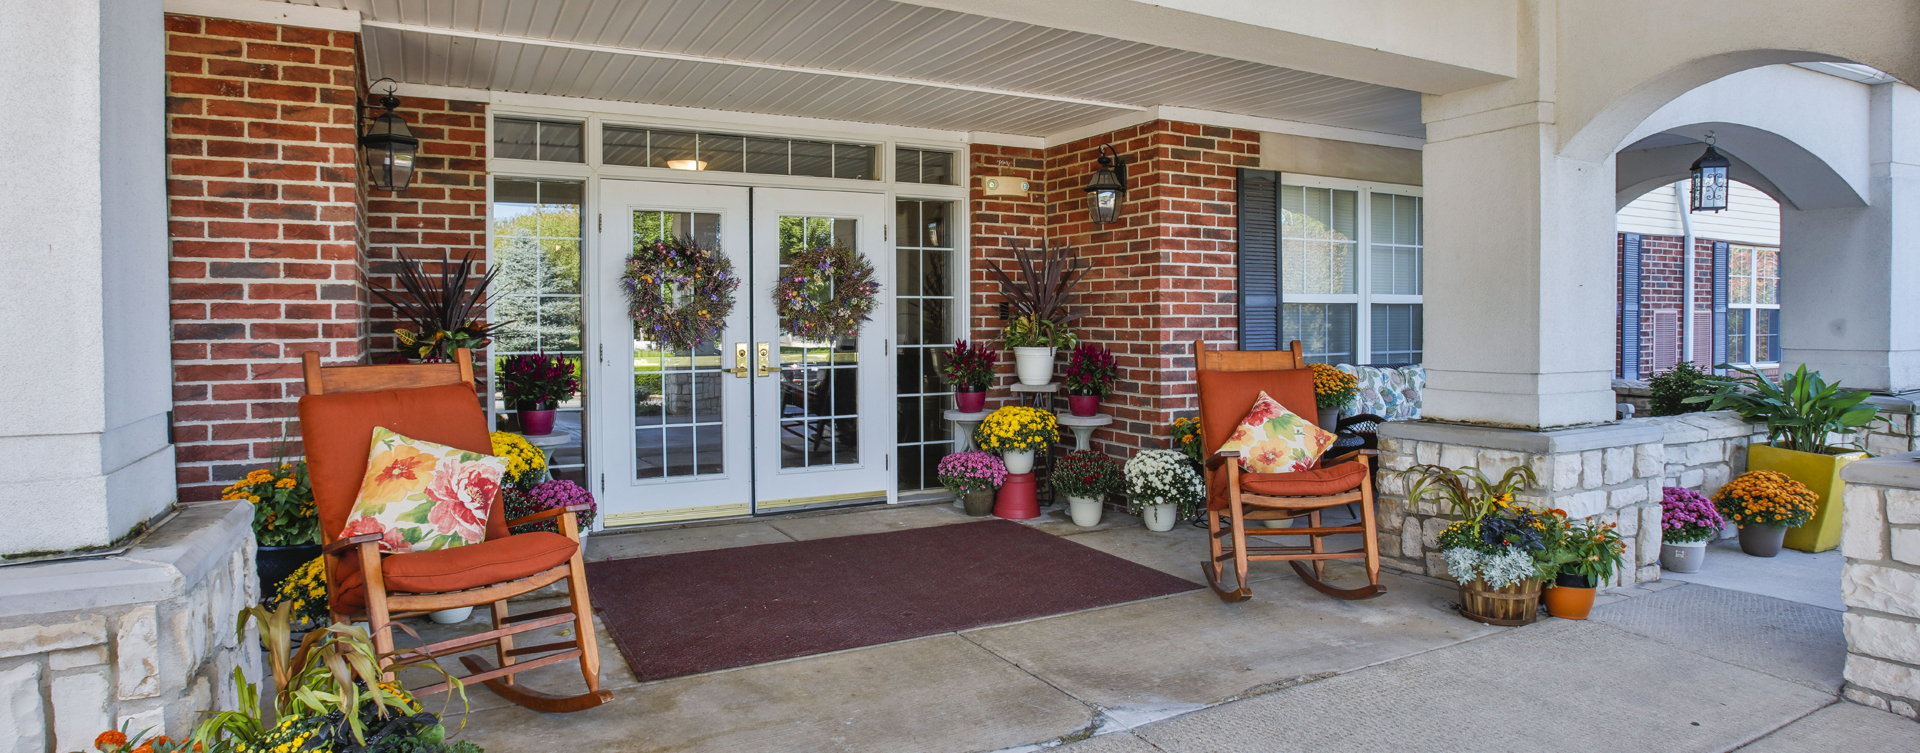 Sip on your favorite drink on the porch at Bickford of Peoria